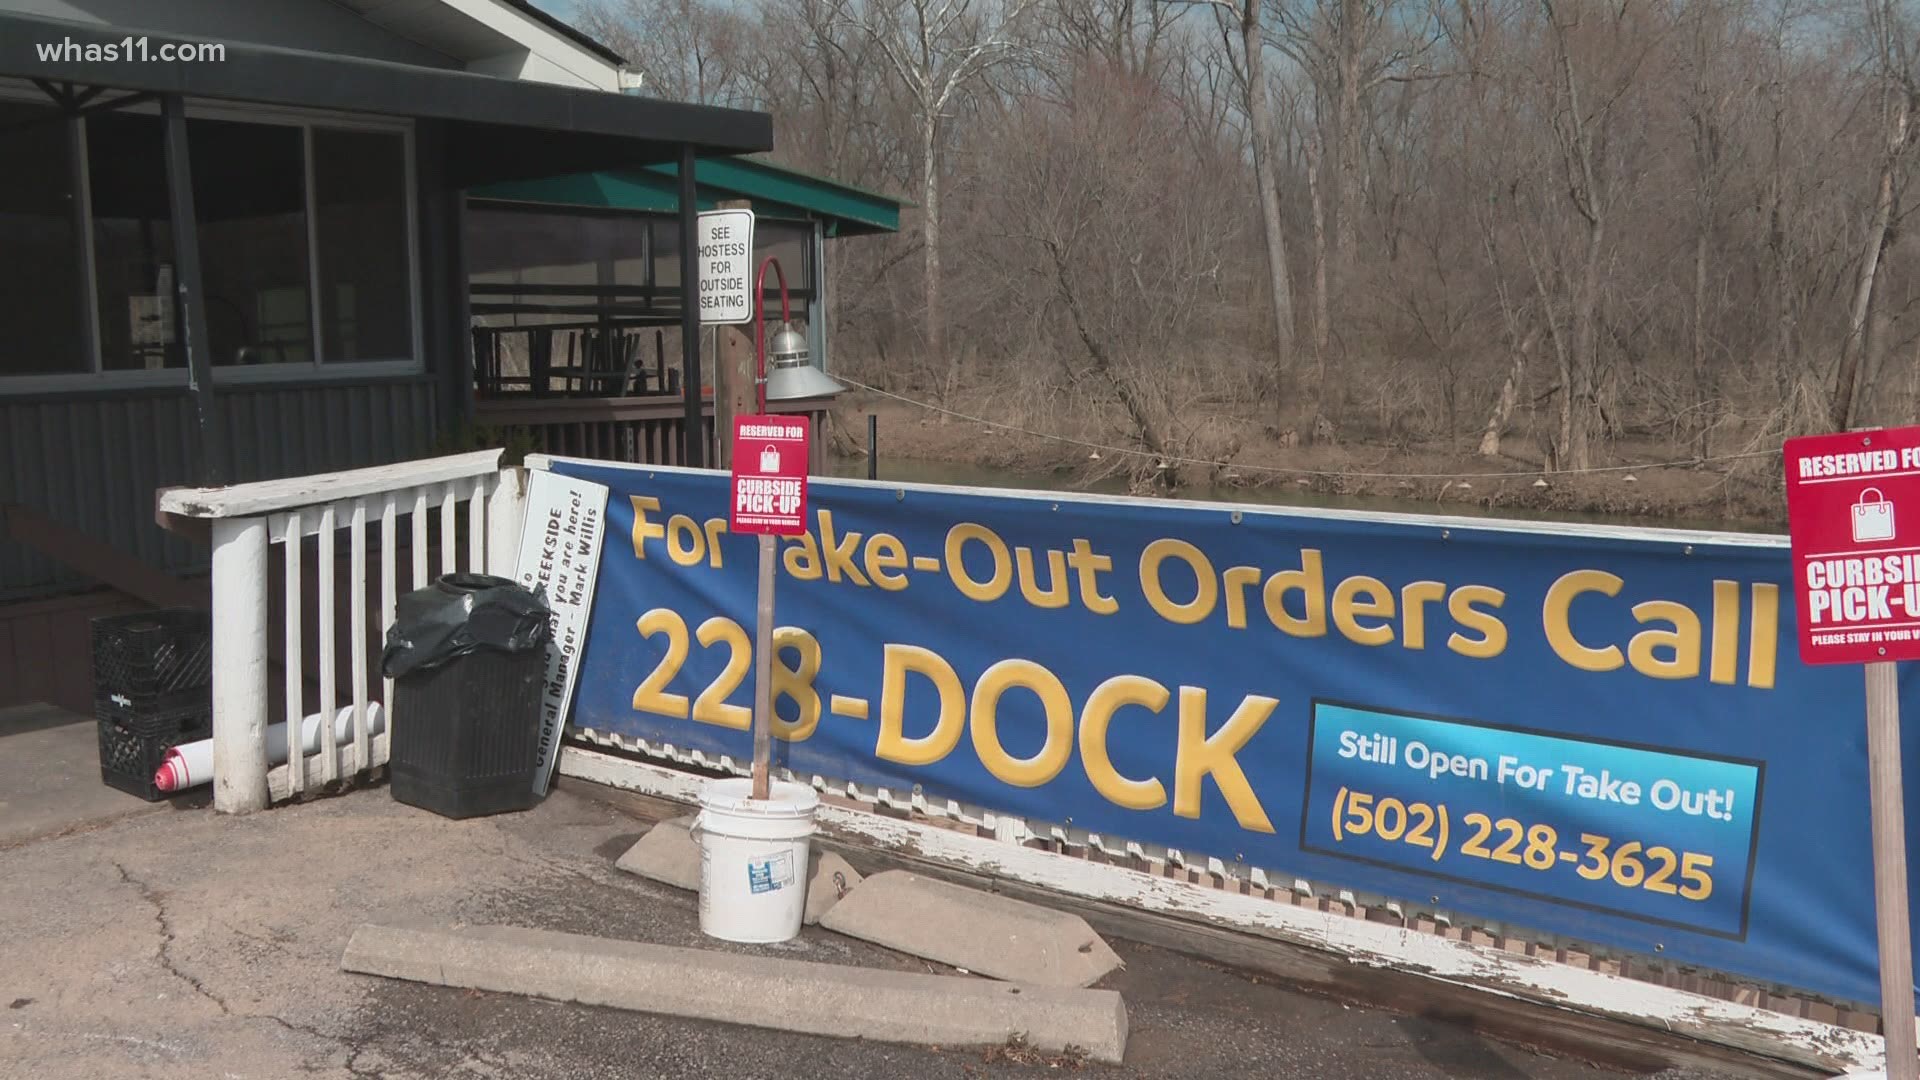 Businesses like Cunningham's are preparing to serve customers again as the area reopens following Ohio River flooding.